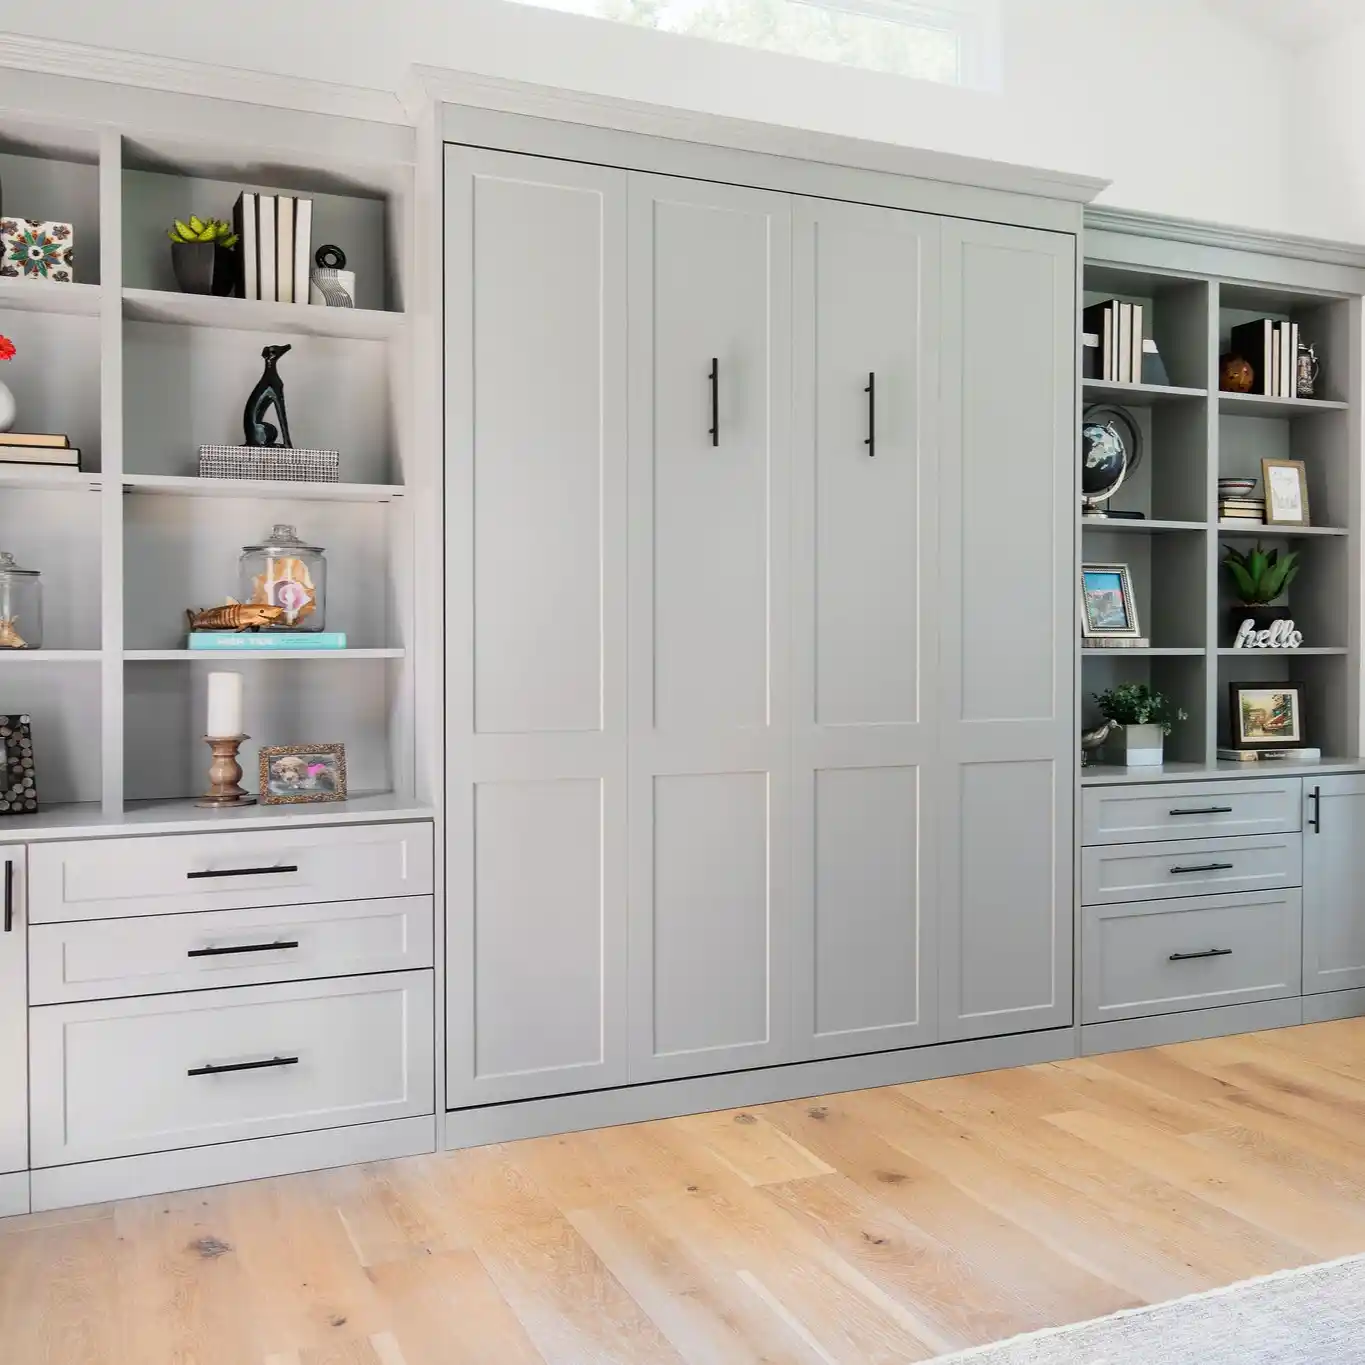 Metropolitan panel bed in grey shaker in a wall-to-wall solution.